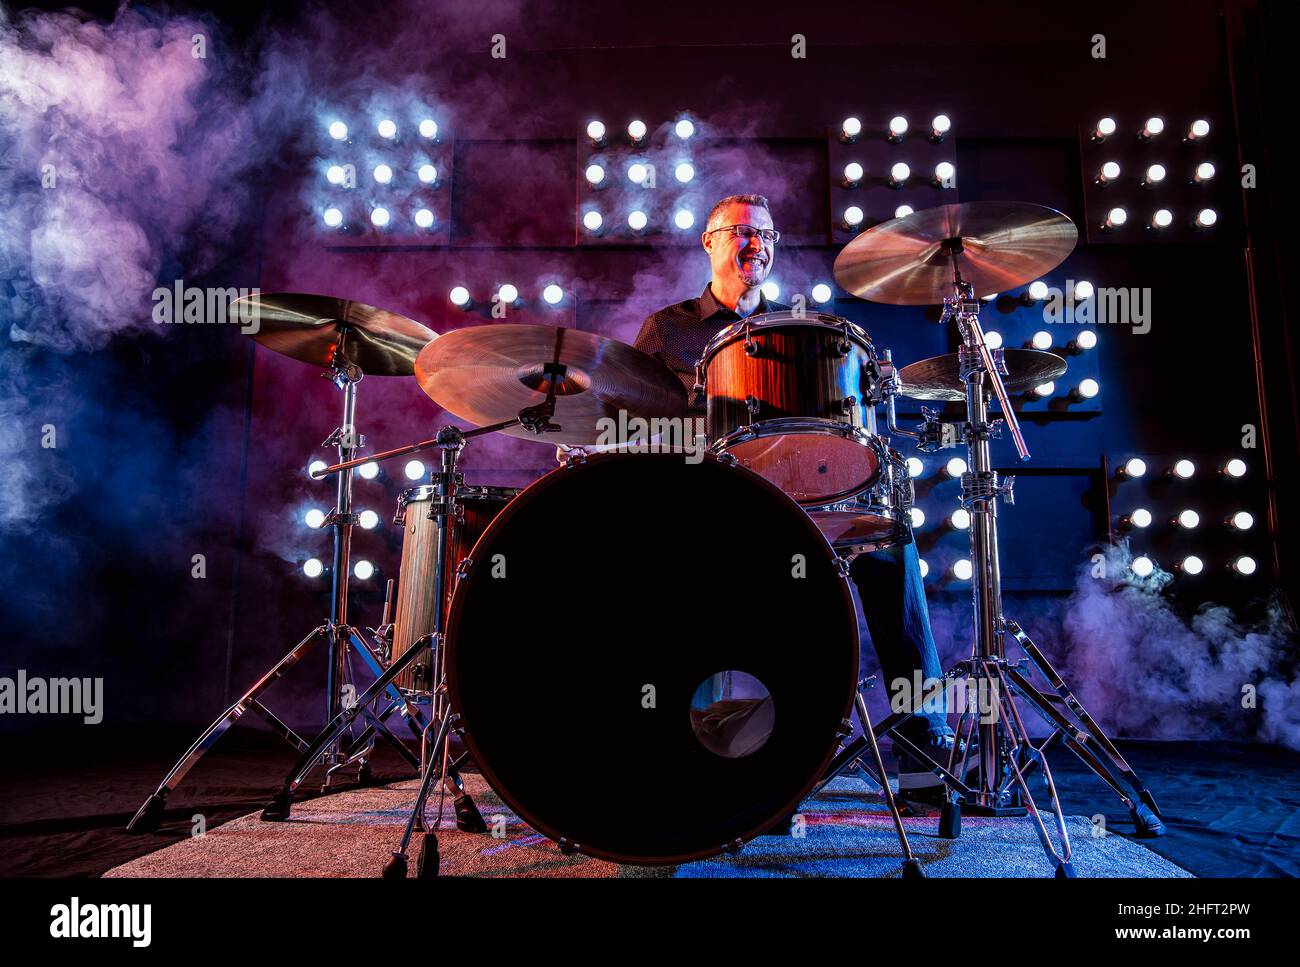 drummer performing in front of audience blinder Stock Photo